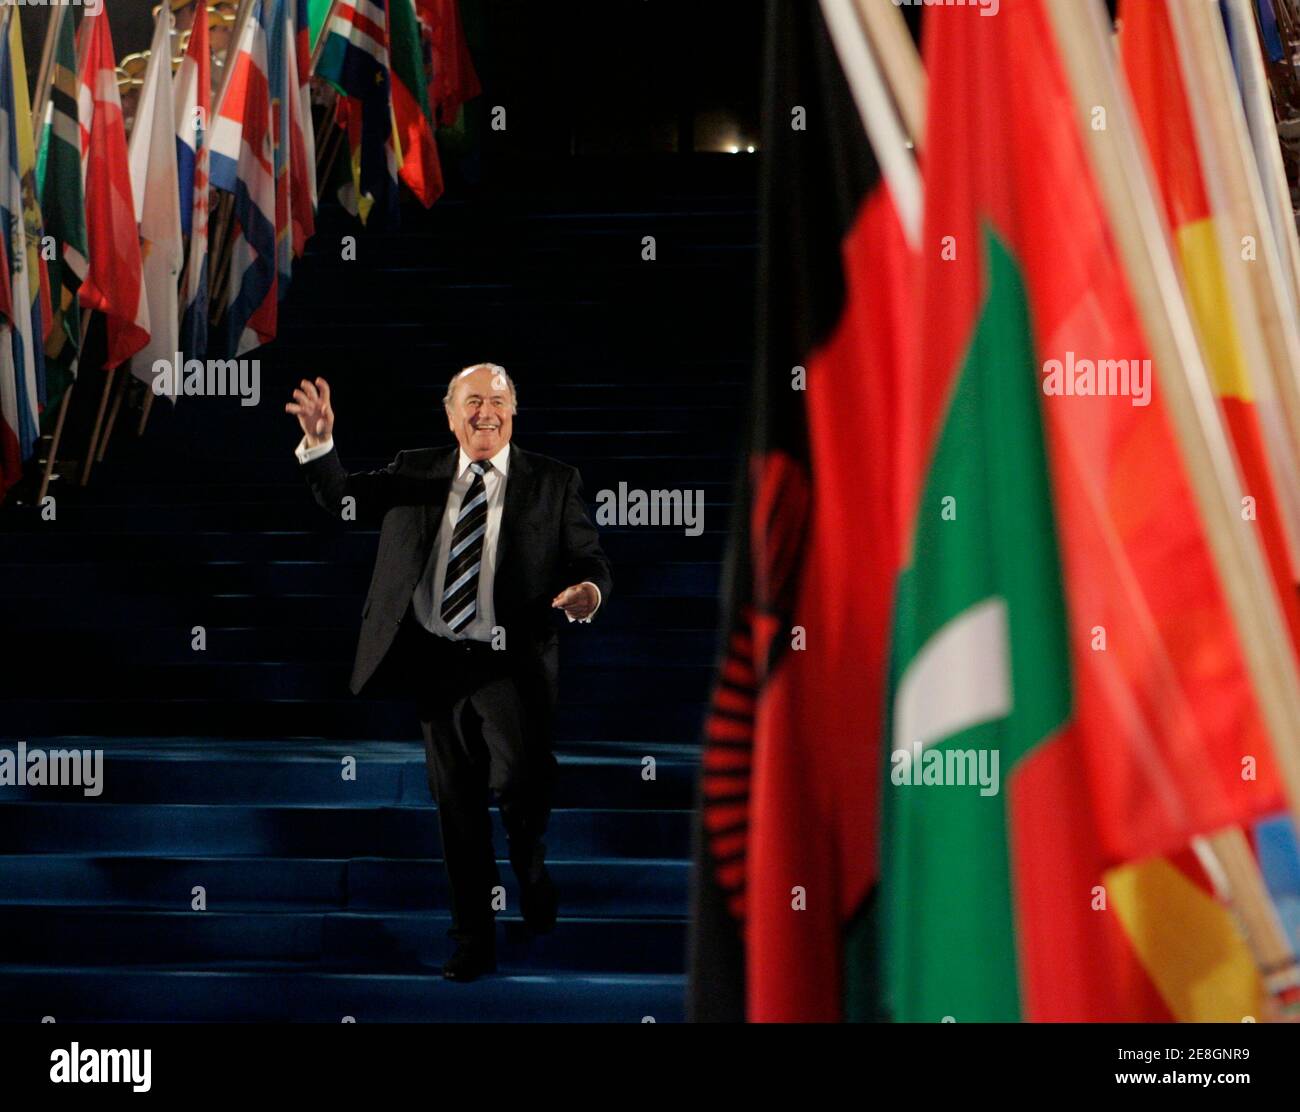 FIFA president Sepp Blatter waves to the media after leaving the opening ceremony of the 58th FIFA congress at the Sydney Opera House May 29, 2008.  REUTERS/Will Burgess    (AUSTRALIA) Stock Photo